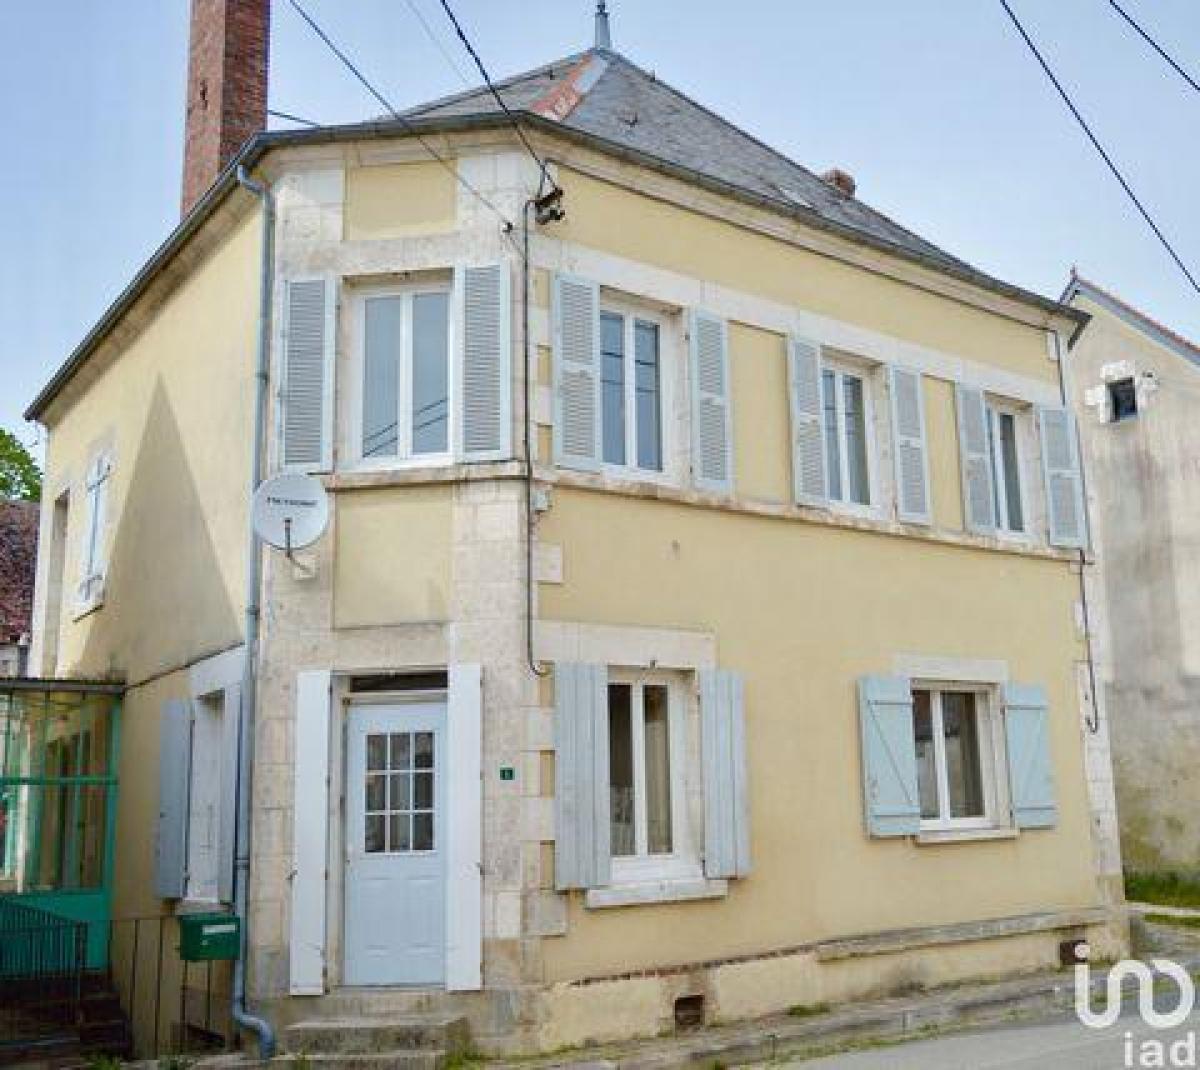 Picture of Home For Sale in Sancerre, Centre, France